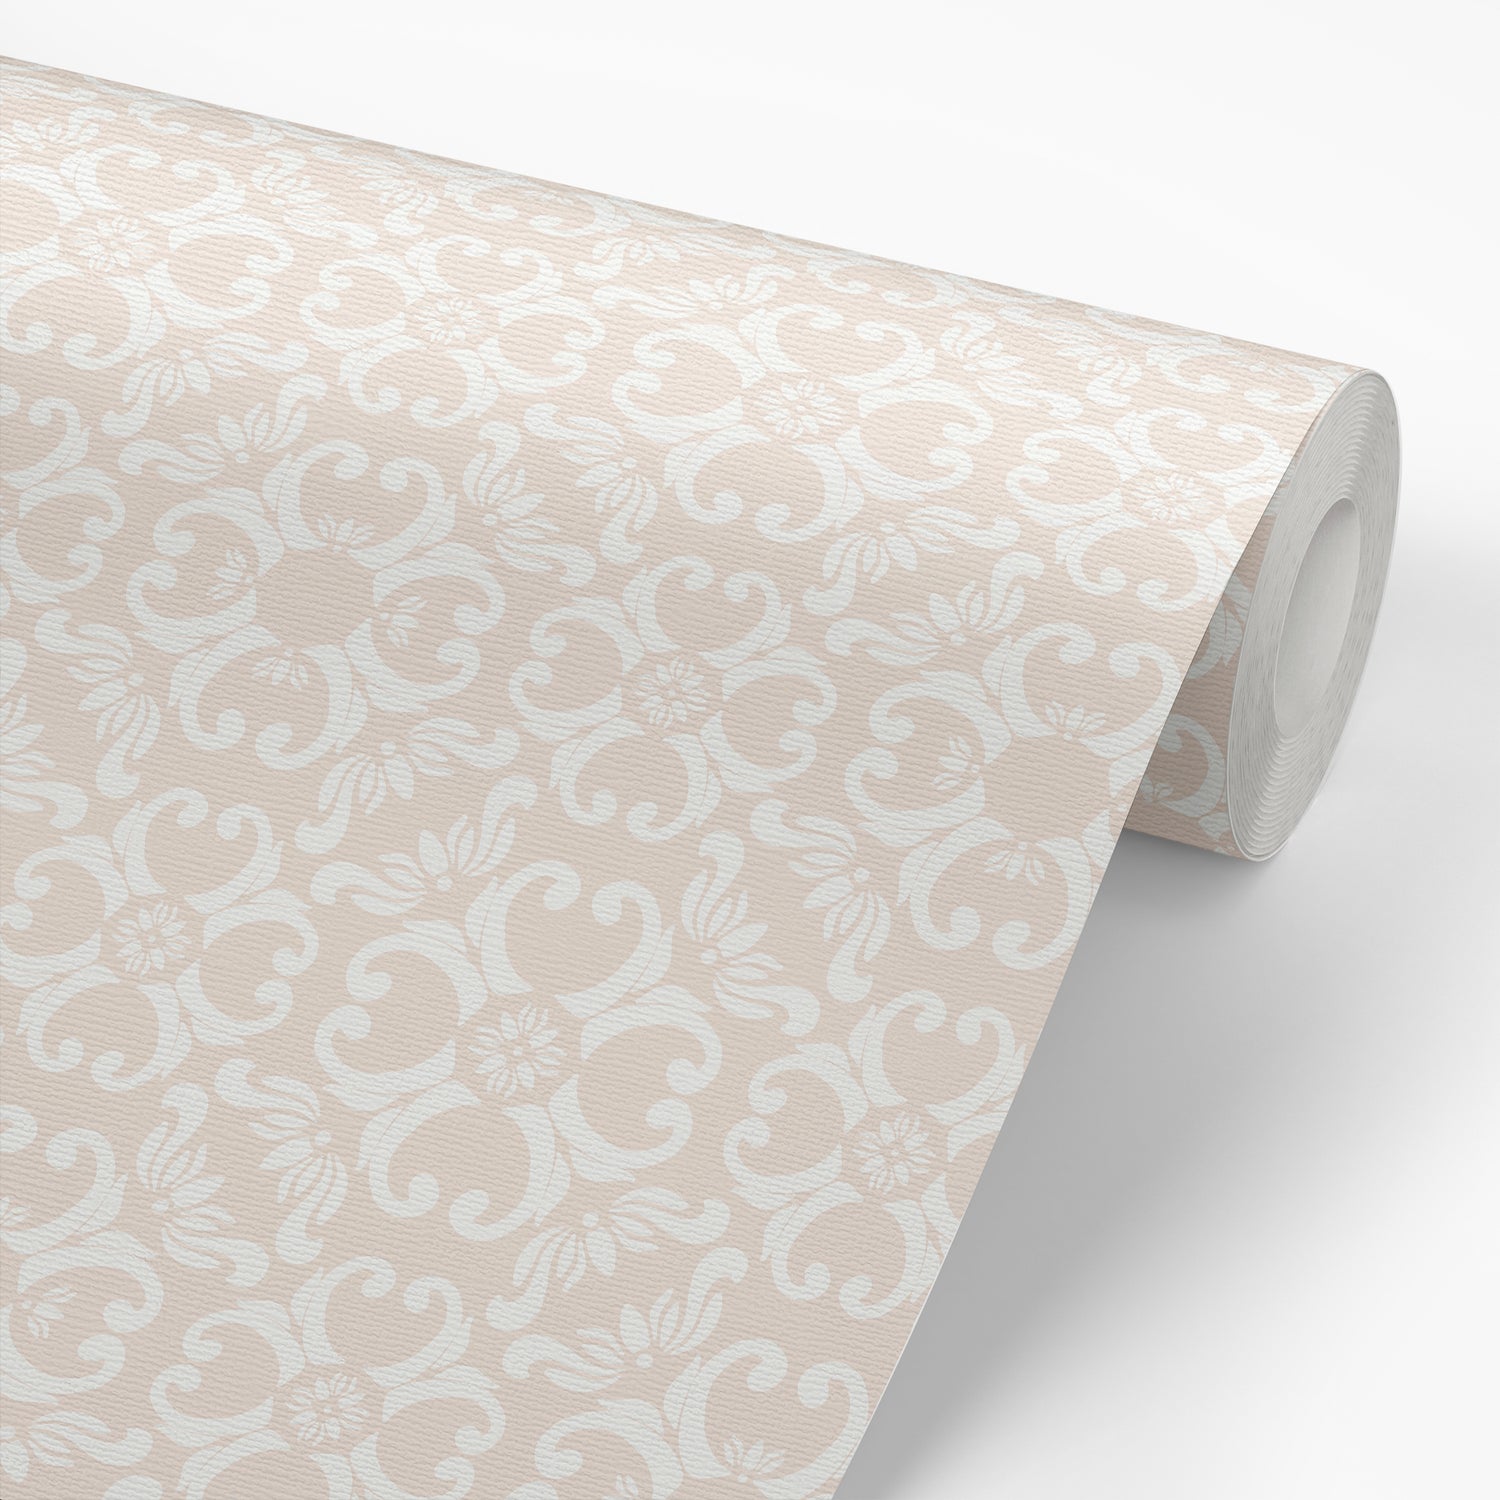 Ayara's peel and stick removable Spanish Tiles Wallpaper in Nude featured on a wallpaper roll.